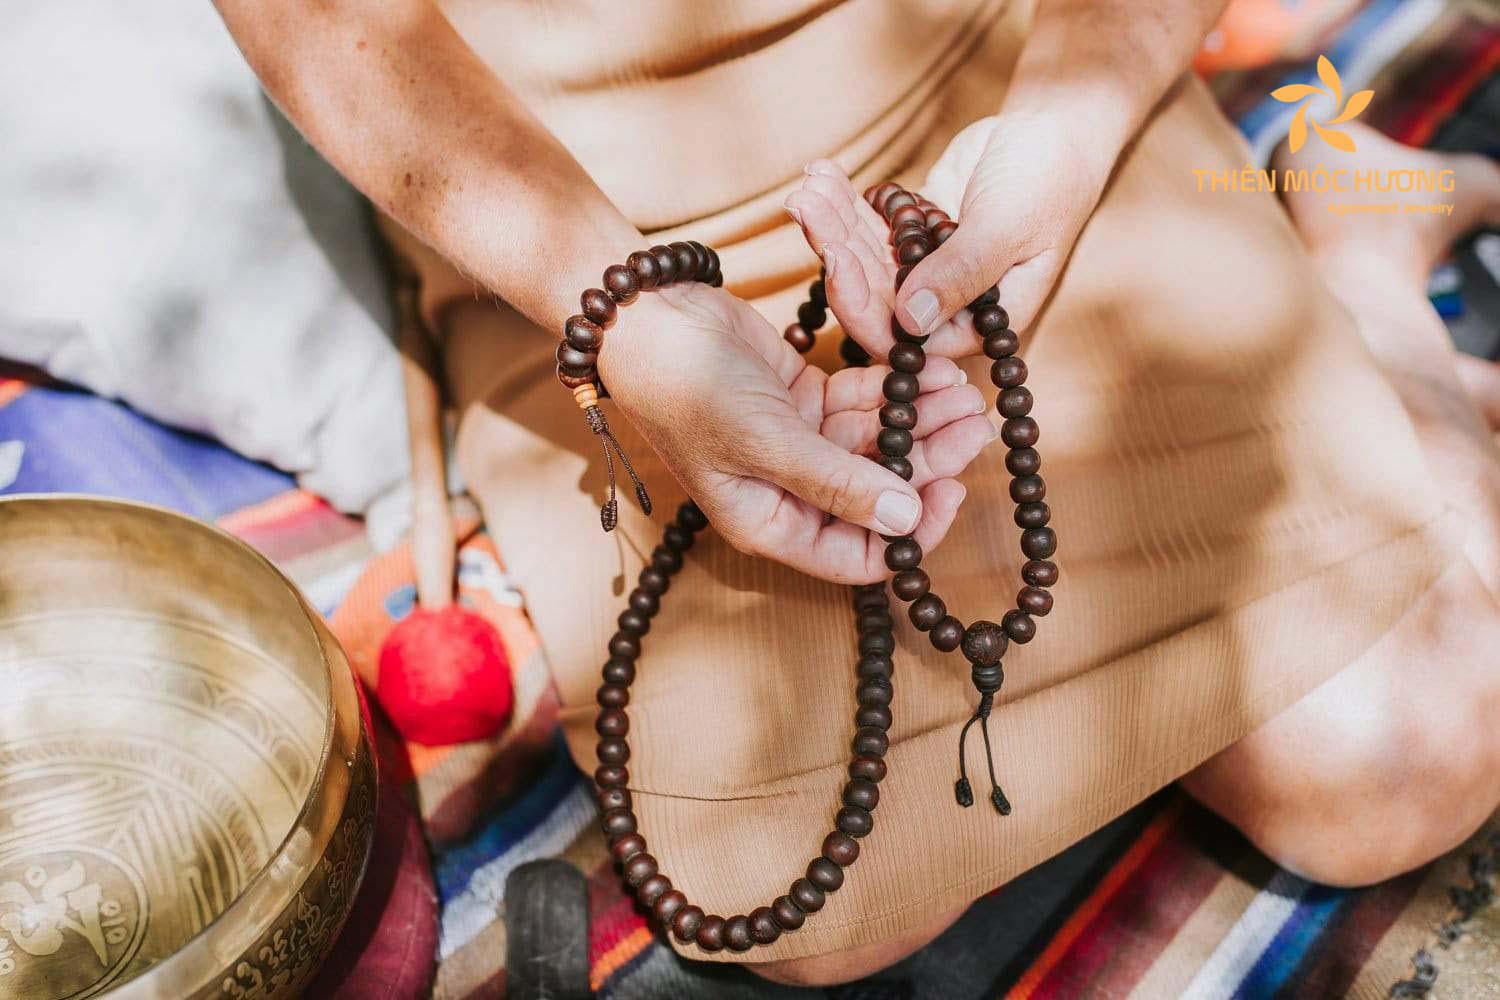 By engaging in meditation with your mala, you create a space to release negative emotions - how to use mala beads